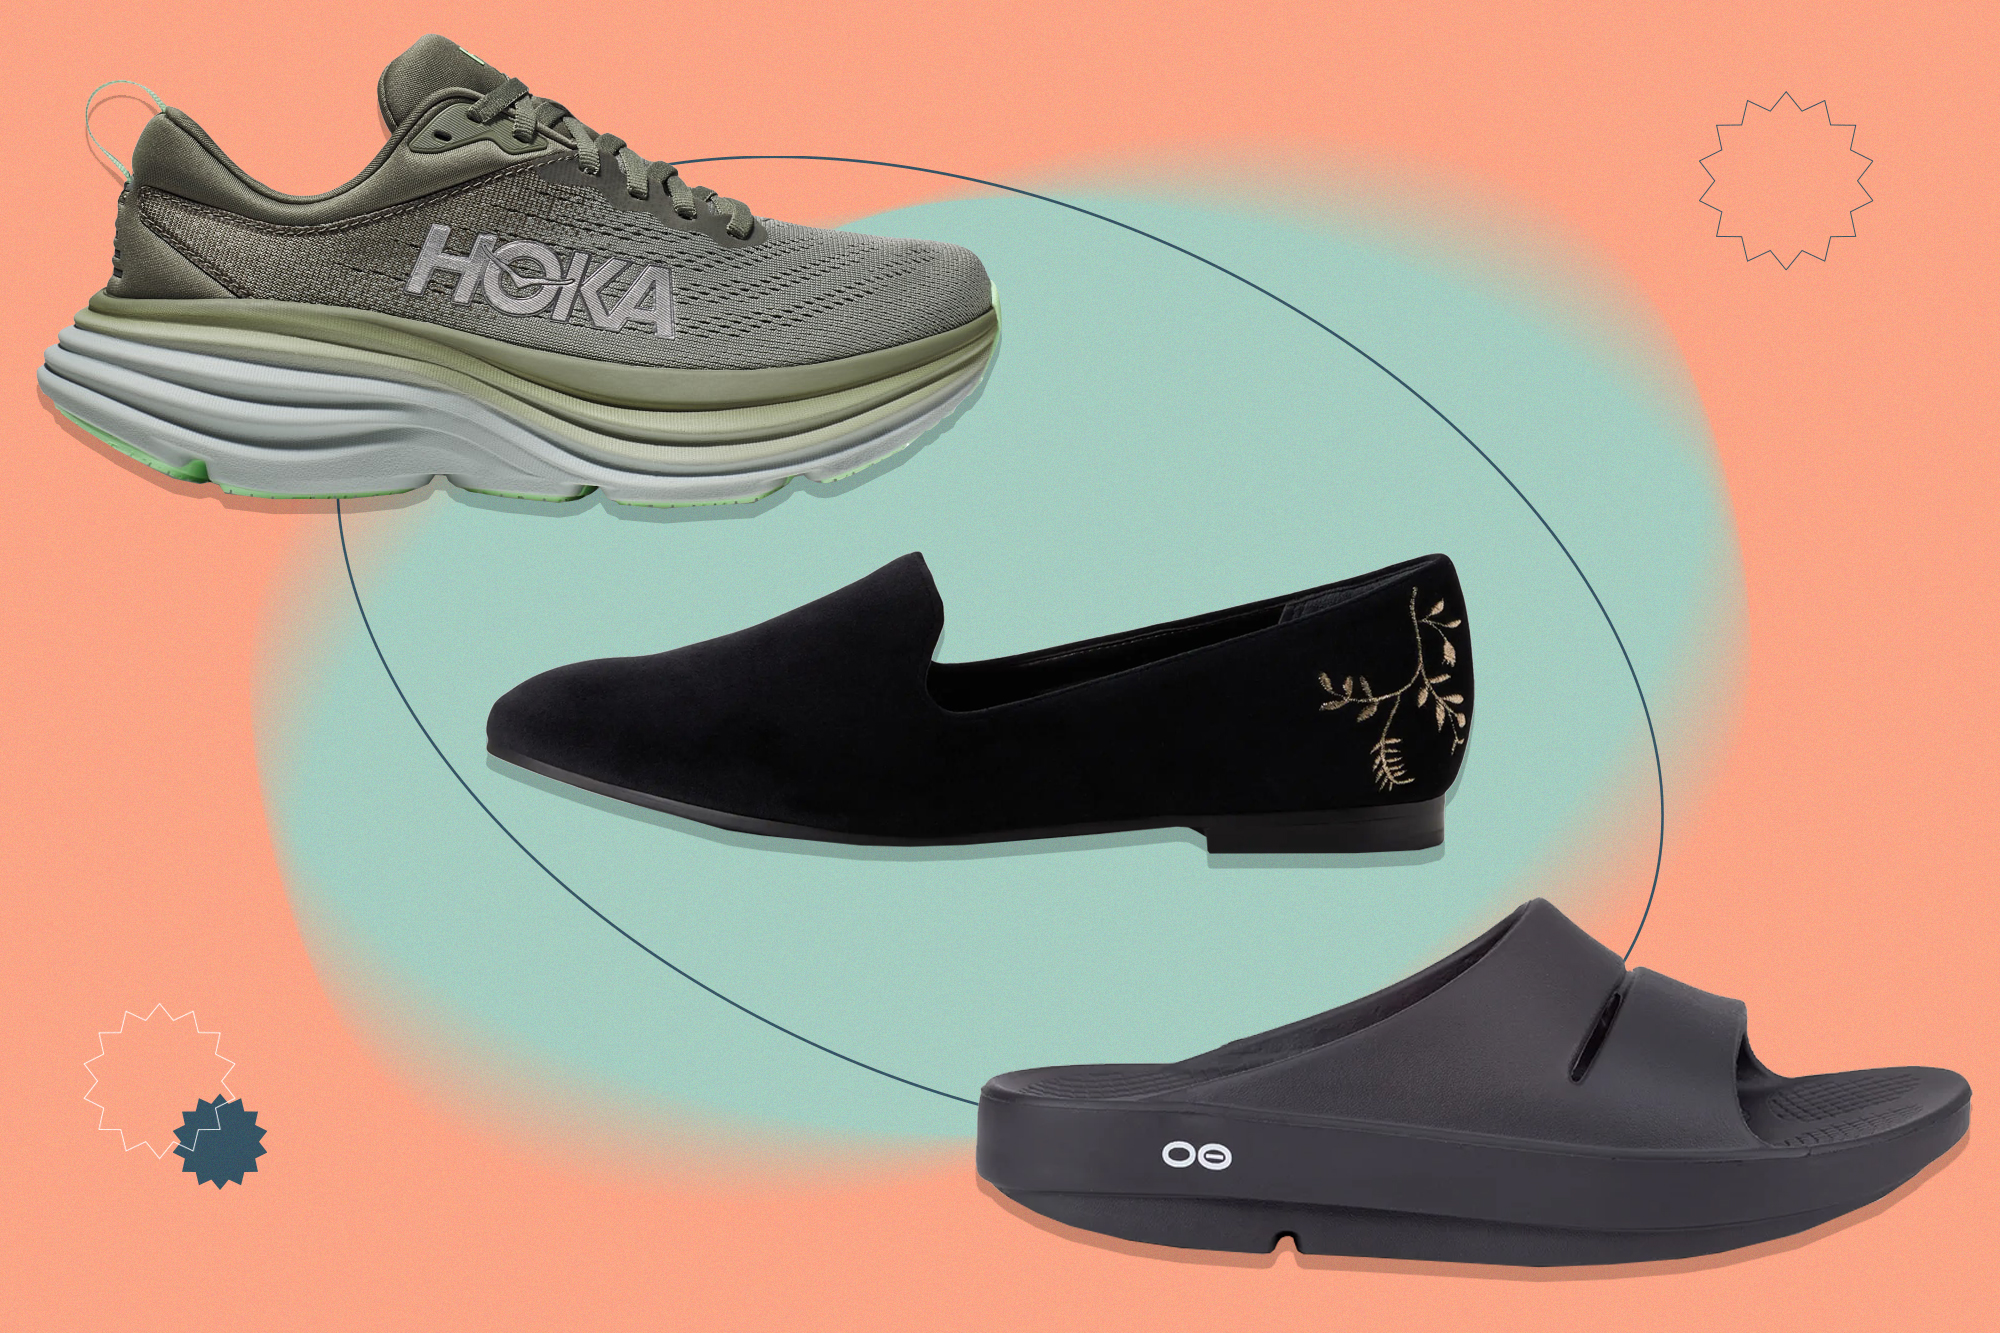 11 shoes to own in your 40s, according to podiatrists